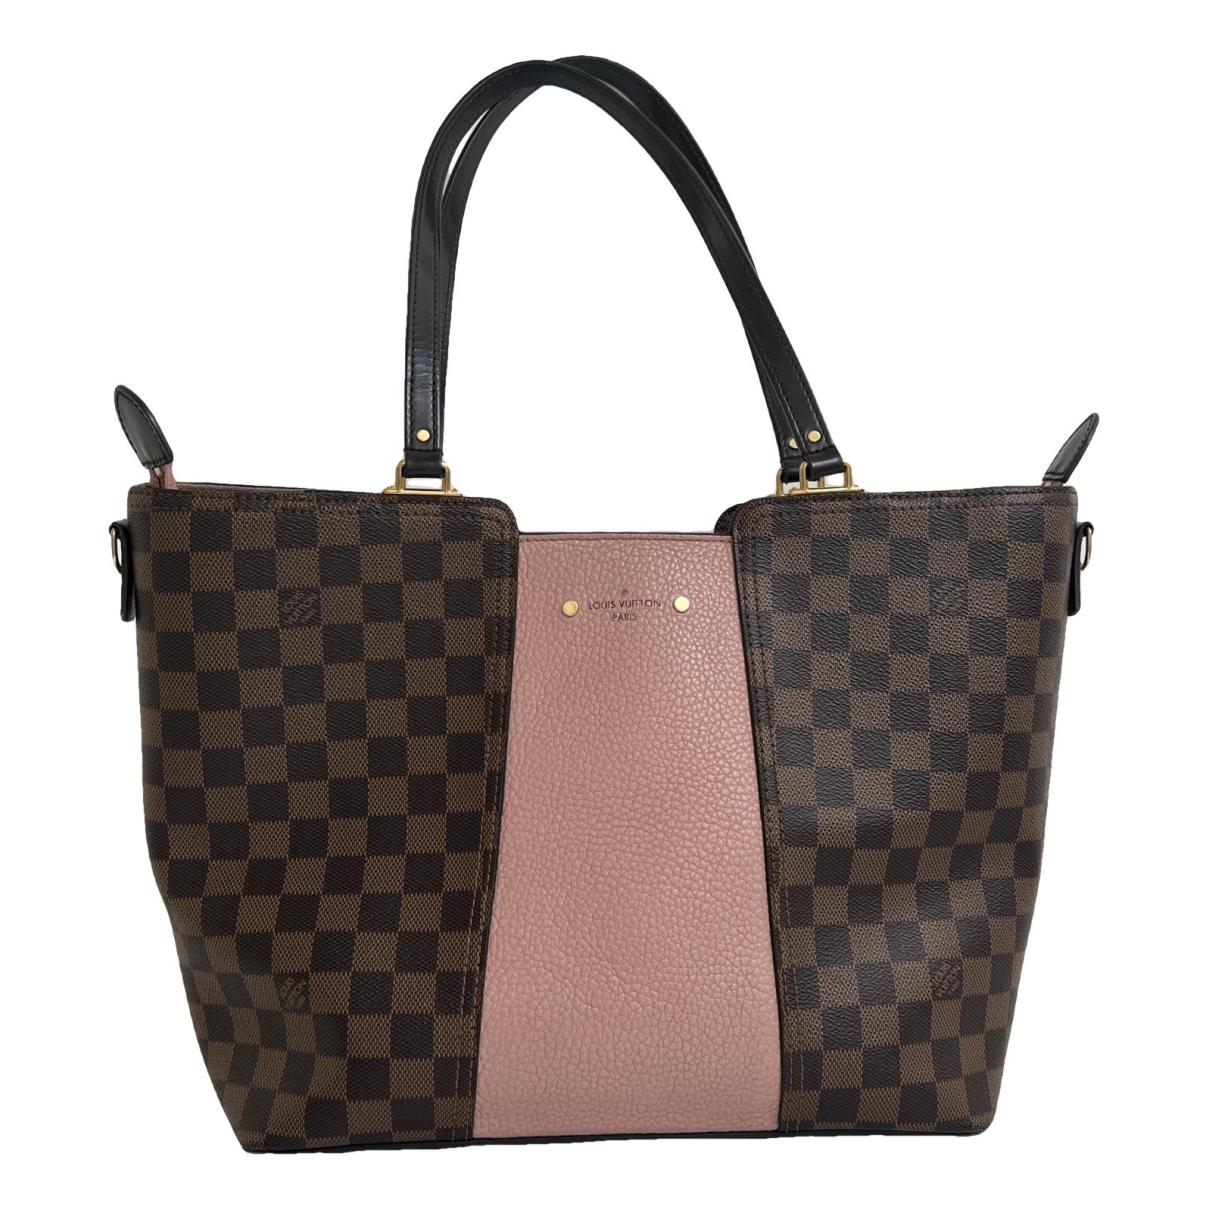 louis vuitton pink and brown bag